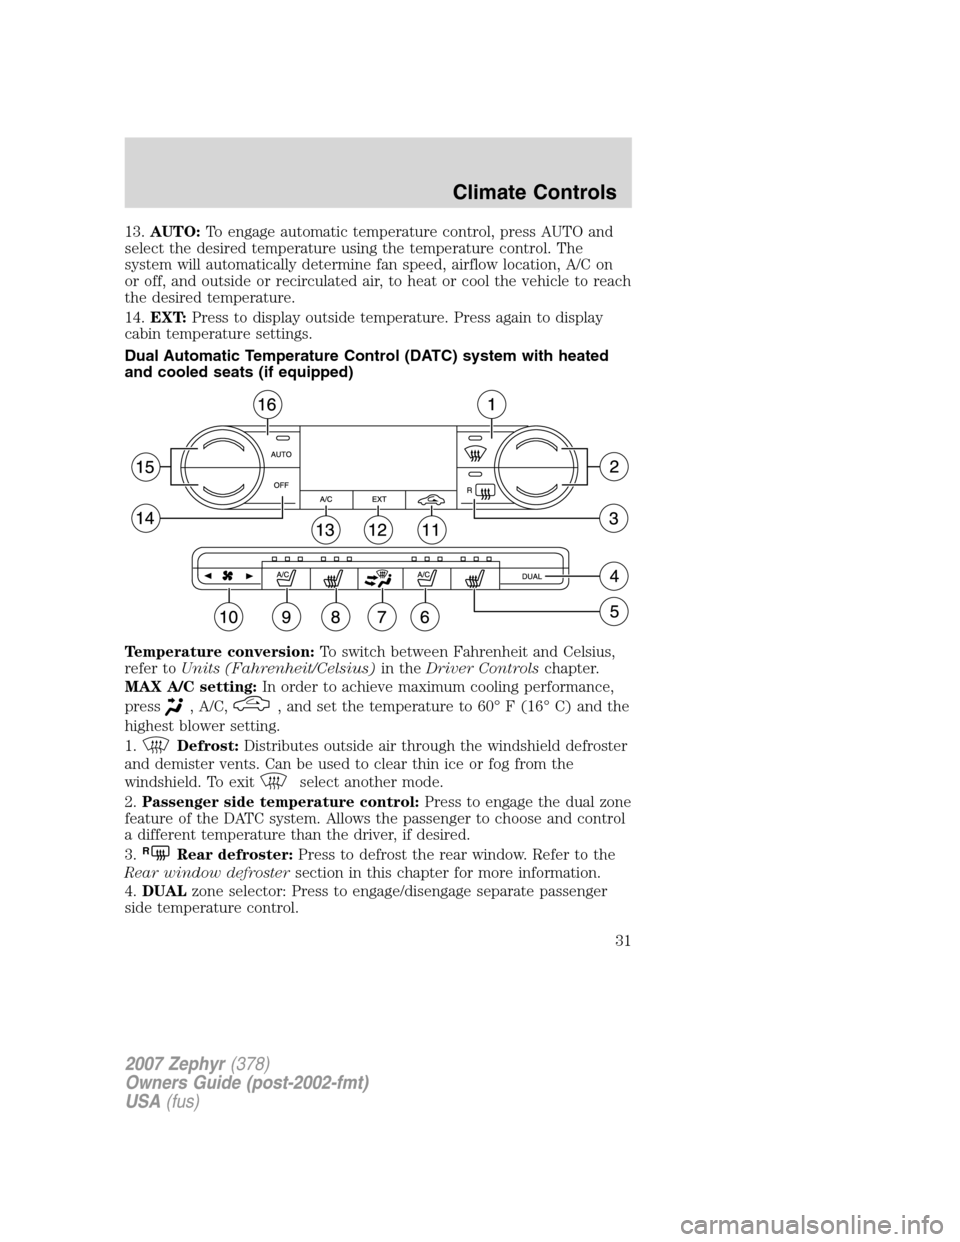 LINCOLN MKZ 2007  Owners Manual 13.AUTO:To engage automatic temperature control, press AUTO and
select the desired temperature using the temperature control. The
system will automatically determine fan speed, airflow location, A/C o